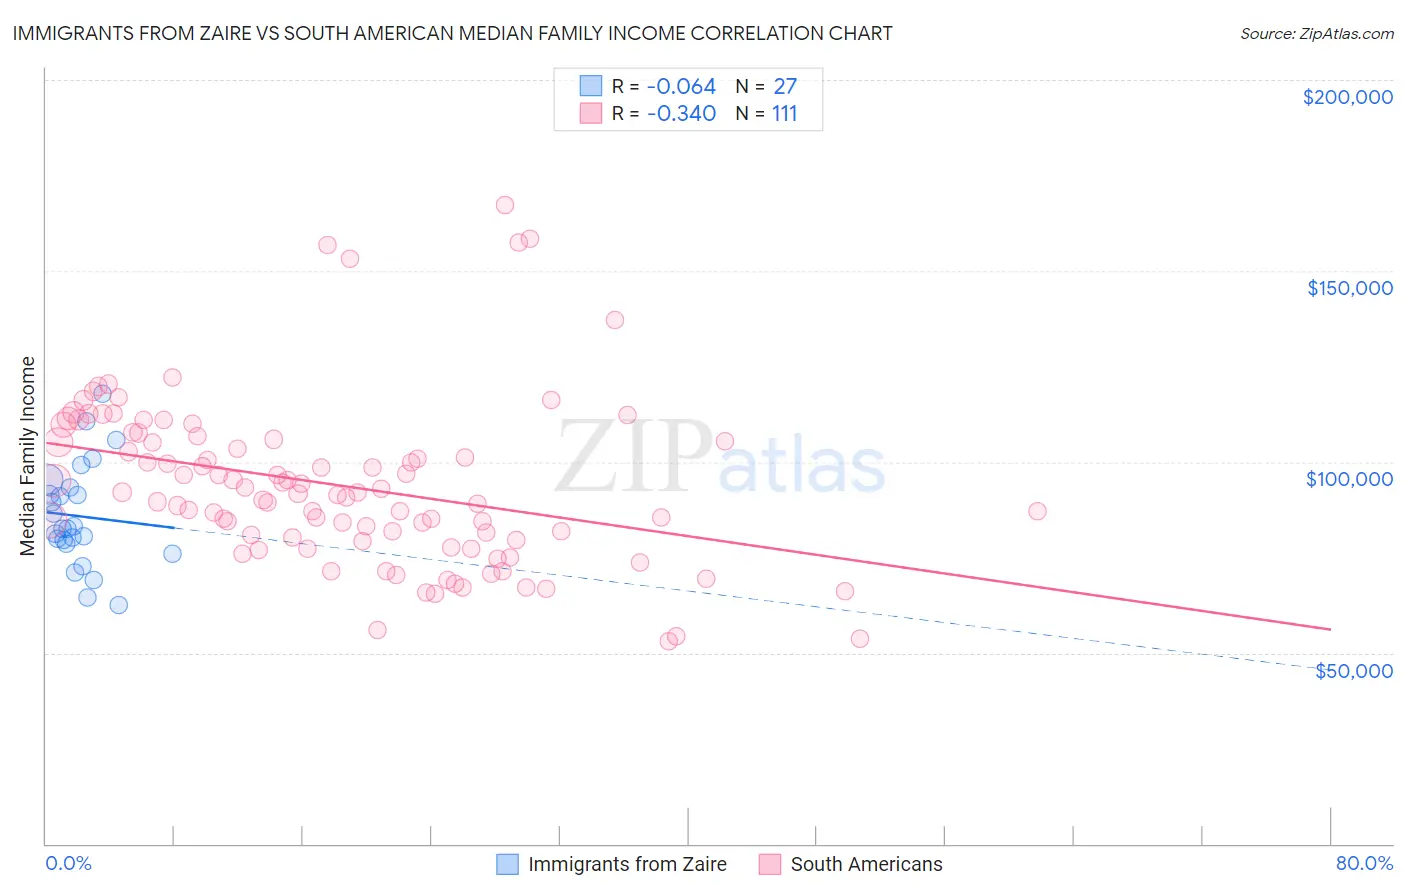 Immigrants from Zaire vs South American Median Family Income